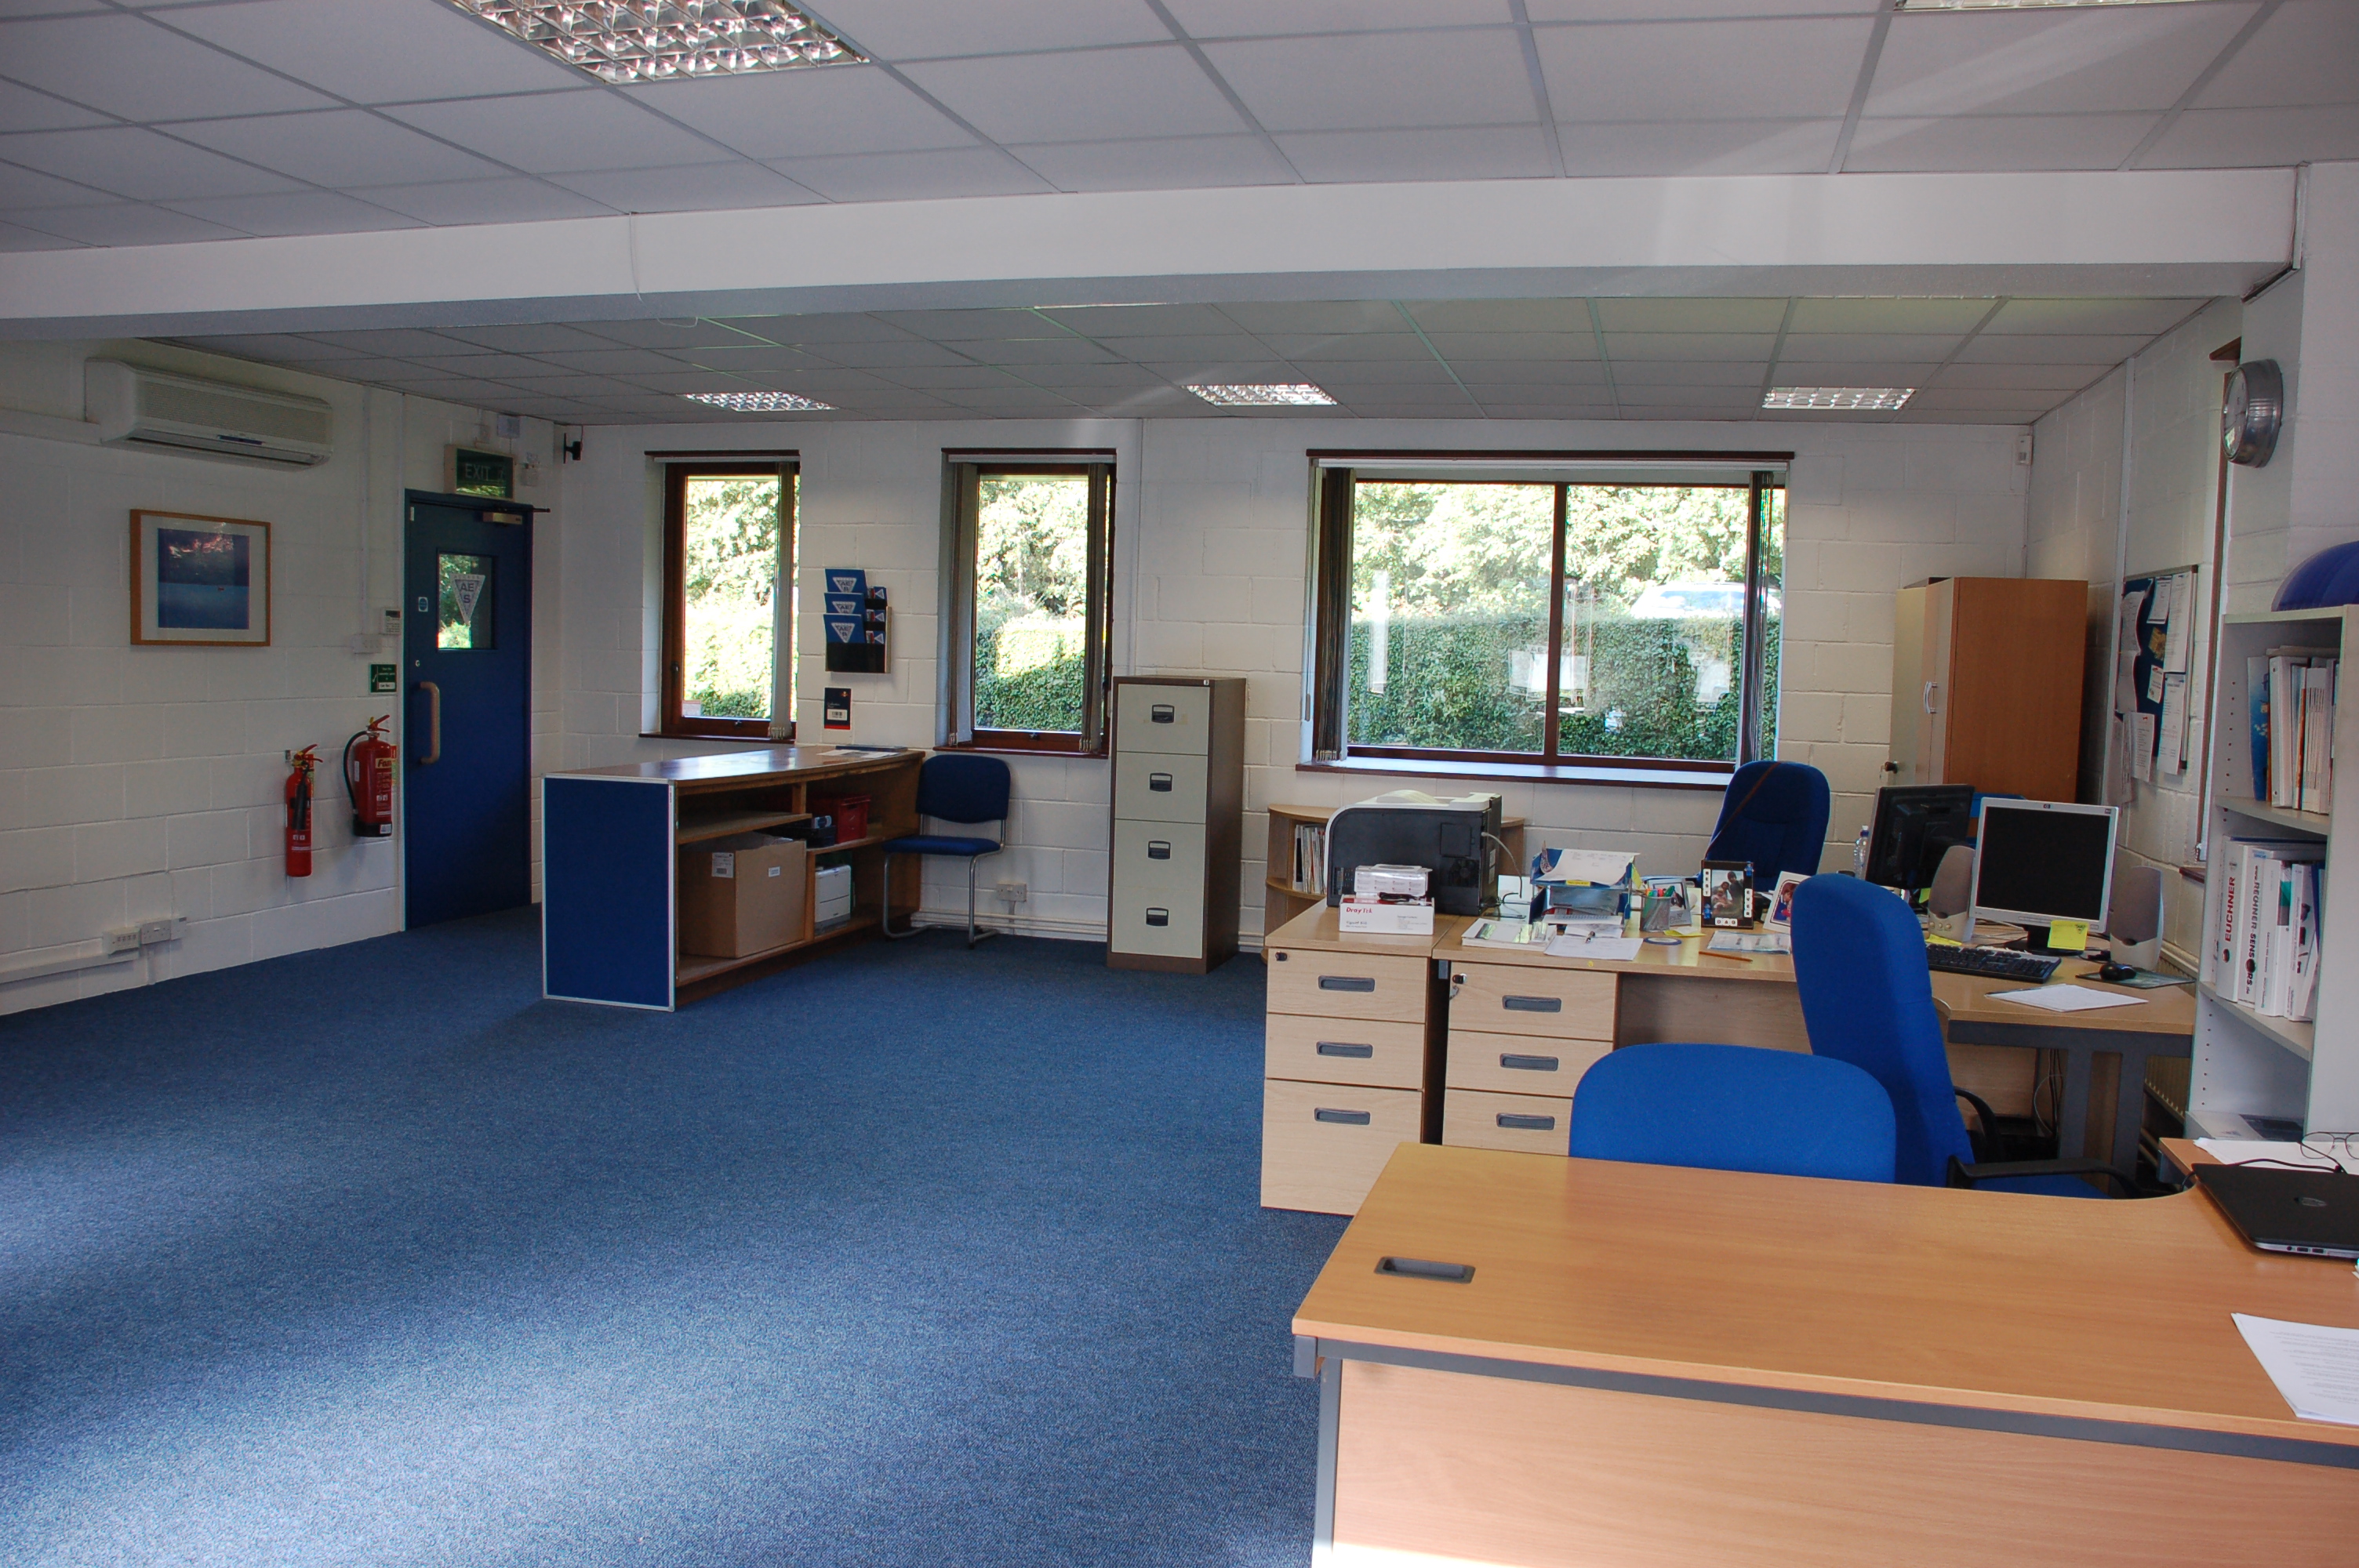 Our Tiverton Office - Our new Tiverton Sales Office